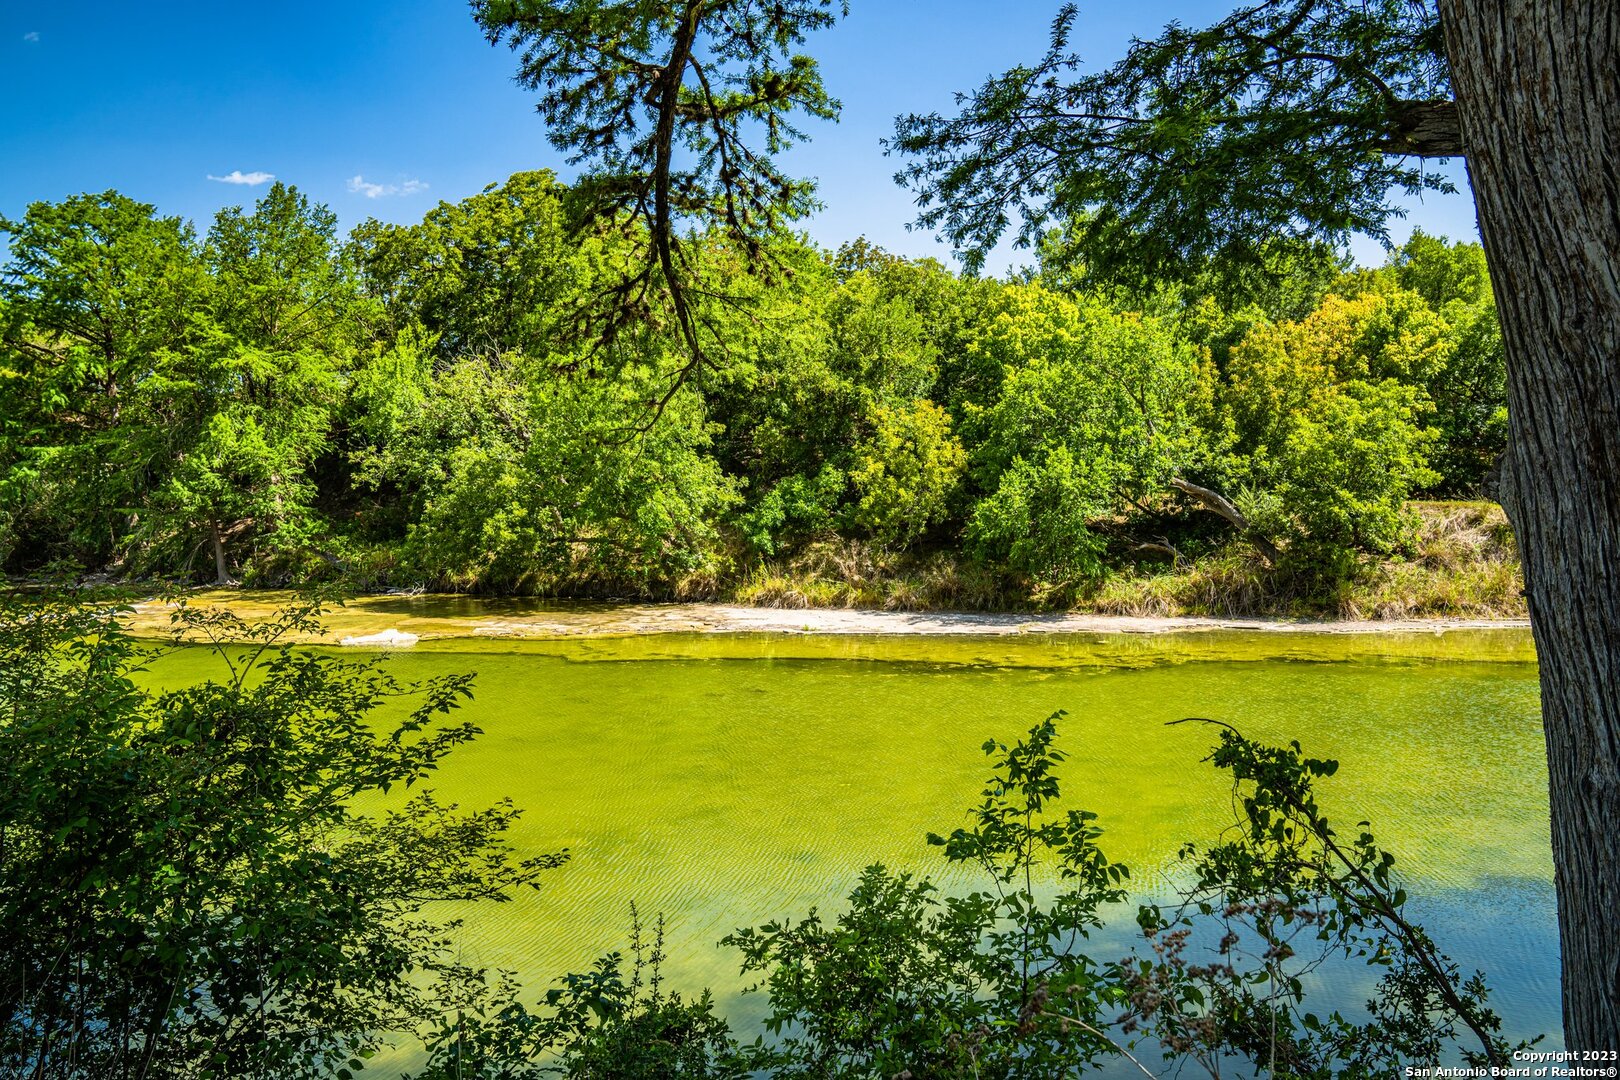 Downtown Wimberley: Hub of the Texas Hill Country - Cypress Creek Cottages